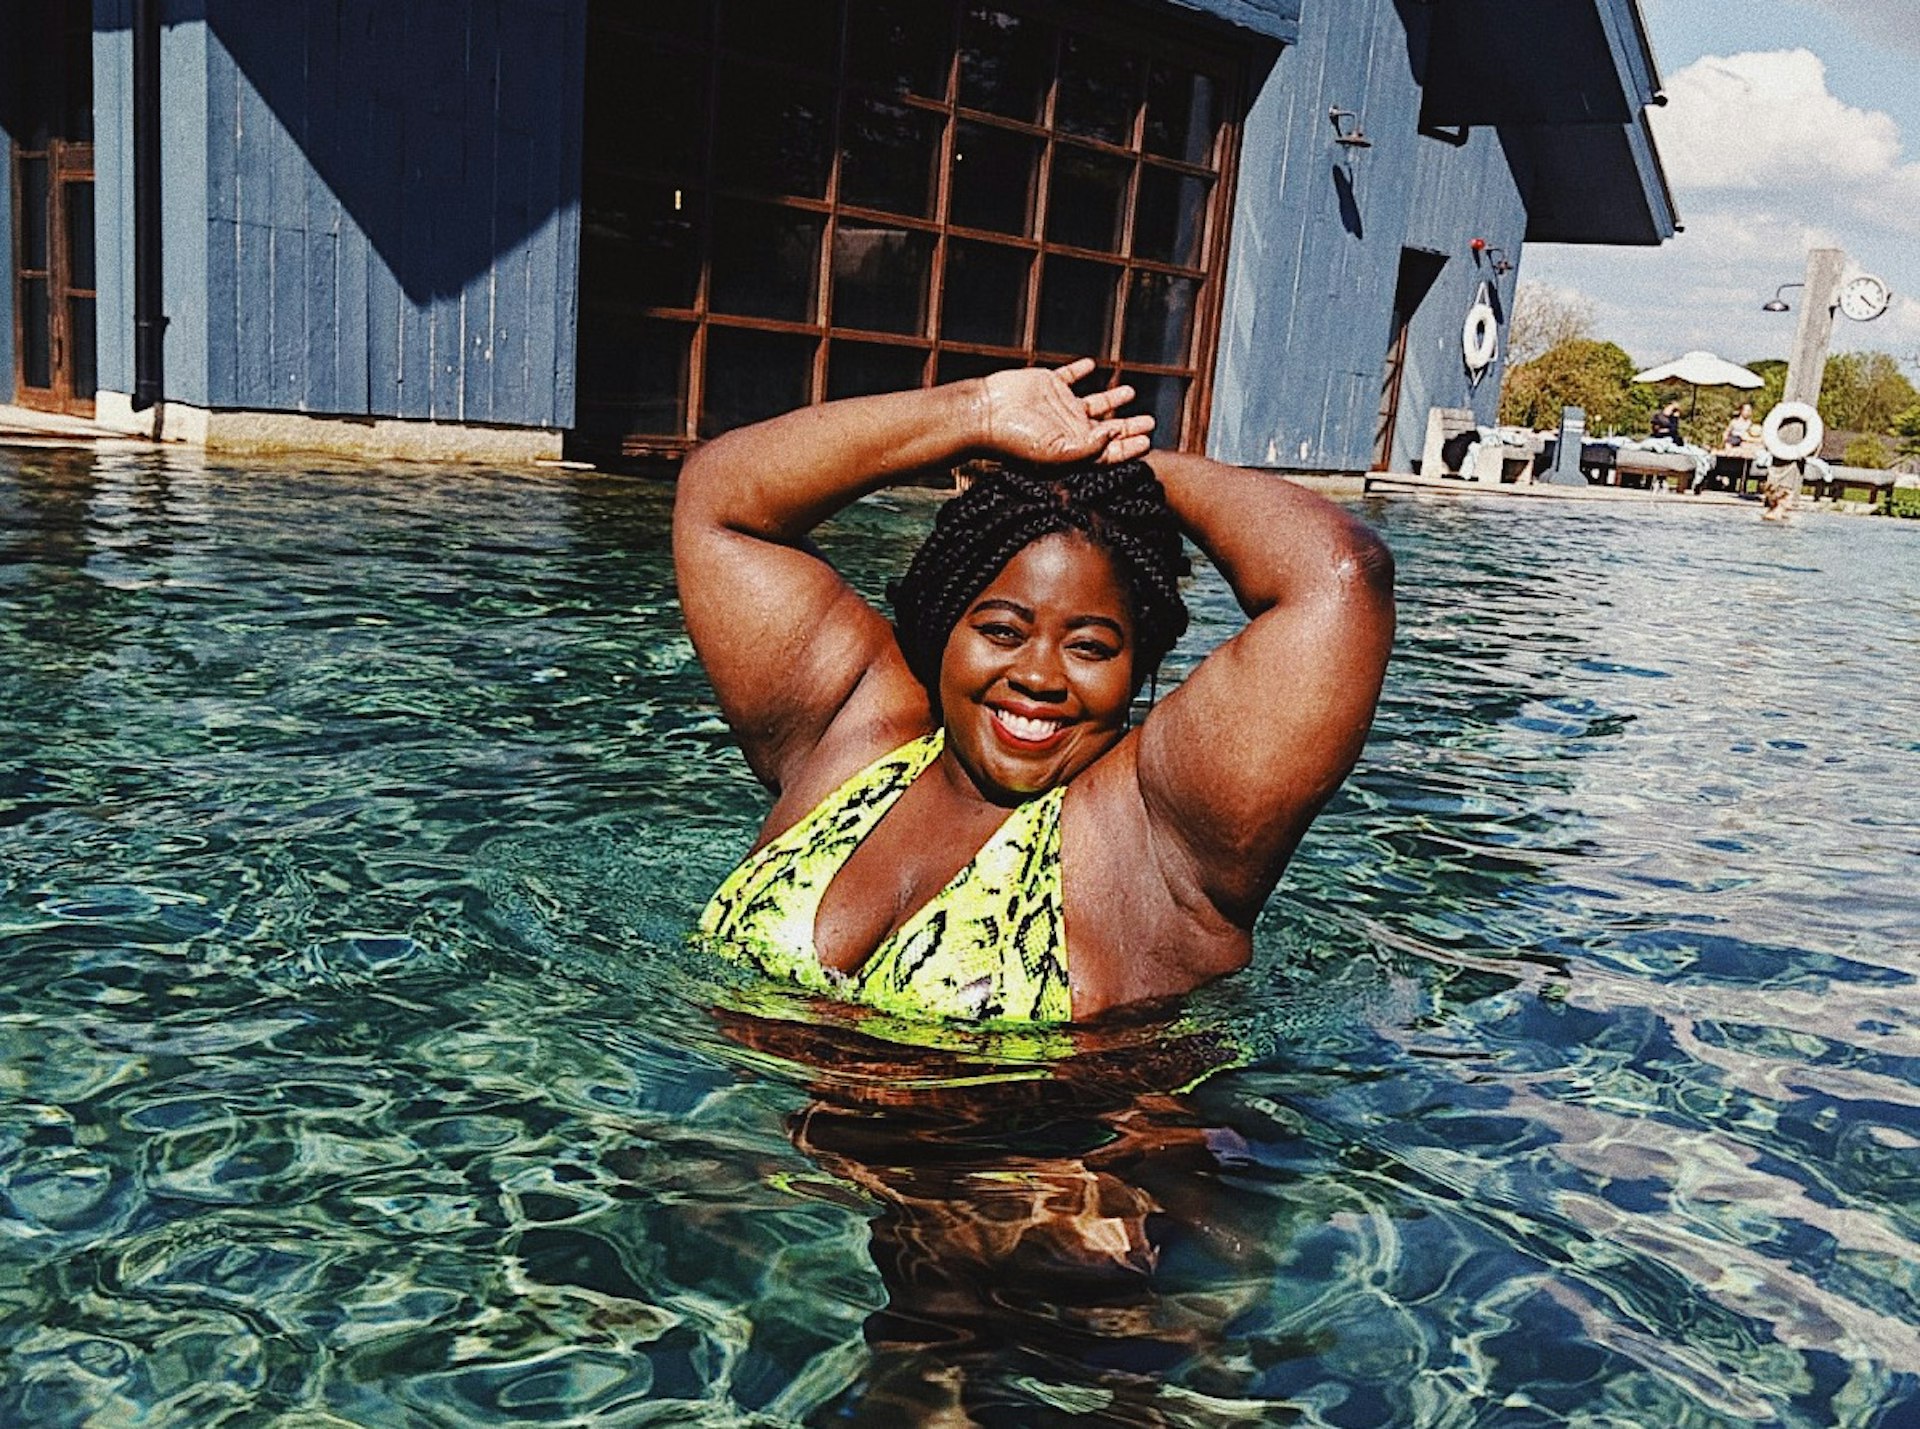 Stephanie Yeboah in a sun-drenched pool in a lime green snakeskin-print bikini. Stepahnie is smiling at the camera with her arms above her head and there is a blue building in the background